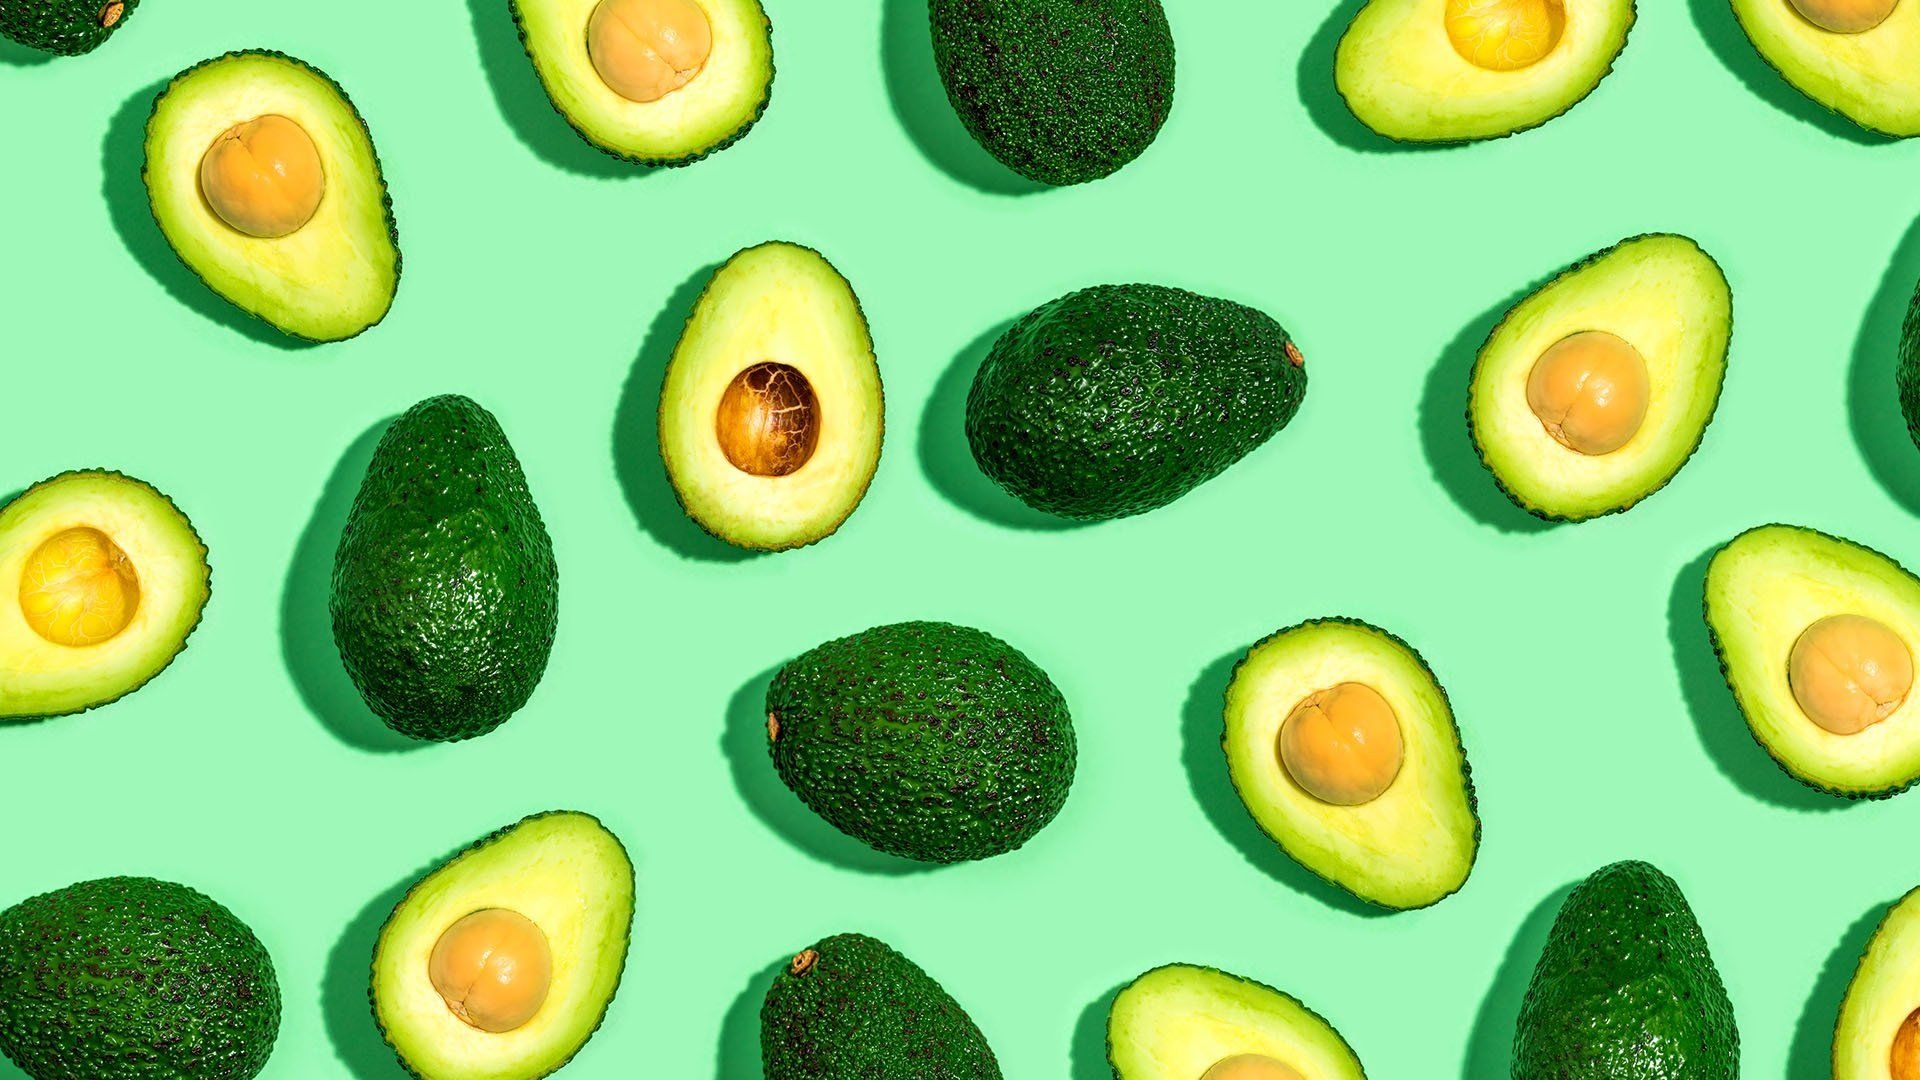 Avocado: Low in total carbohydrates, Superfood. 1920x1080 Full HD Wallpaper.